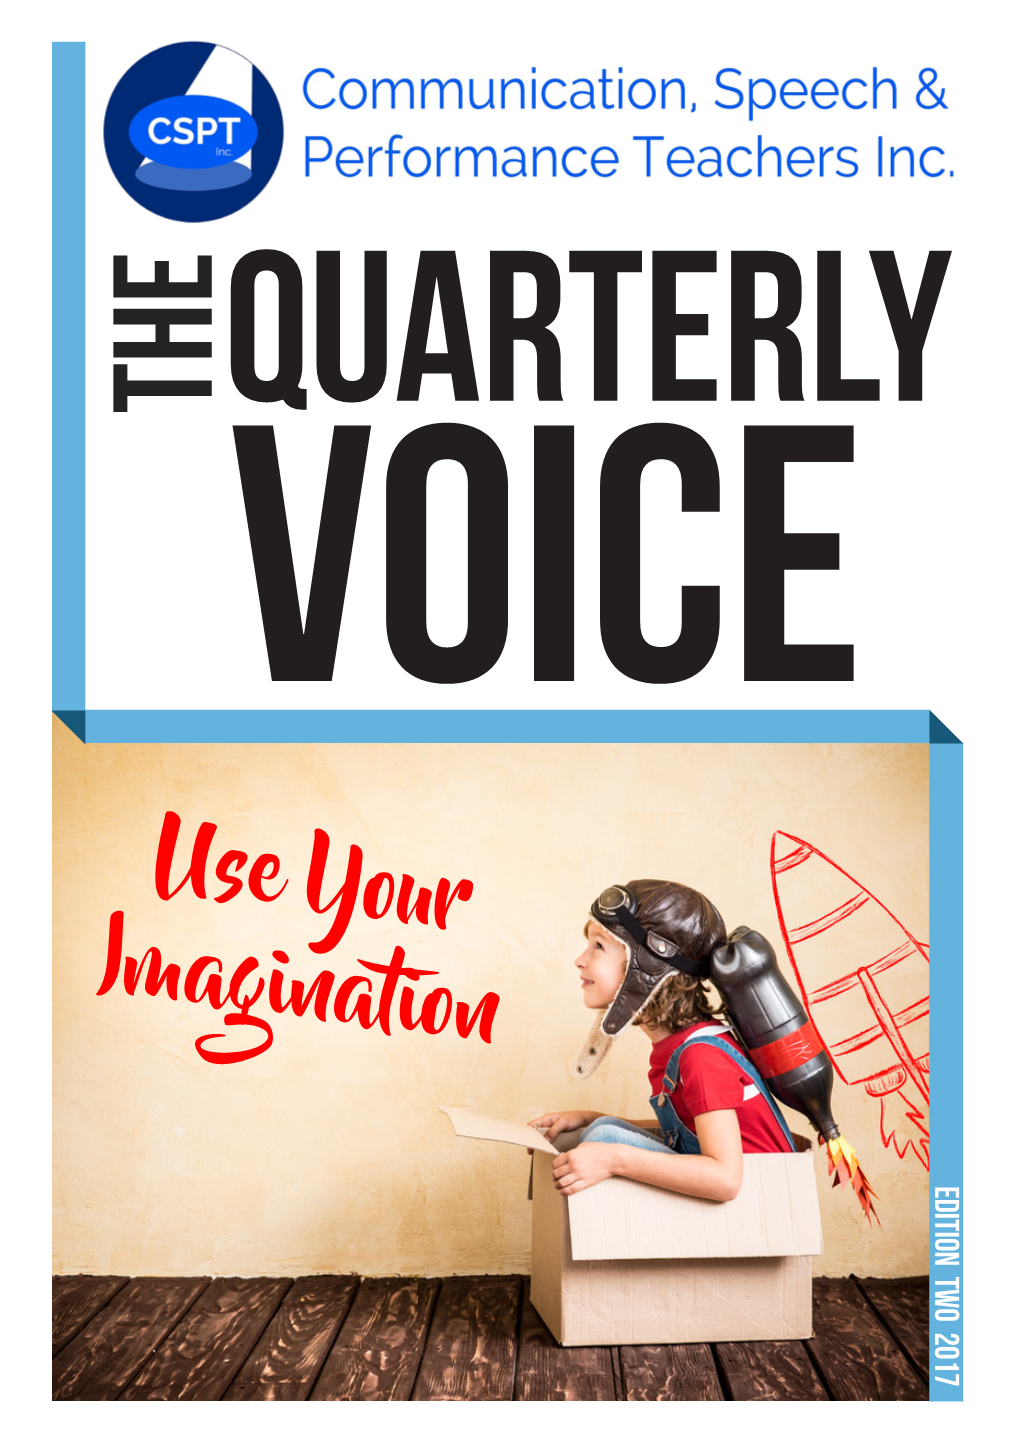 Use Your Imagination EDITION TWO 2017 Editors' Note Dear Members